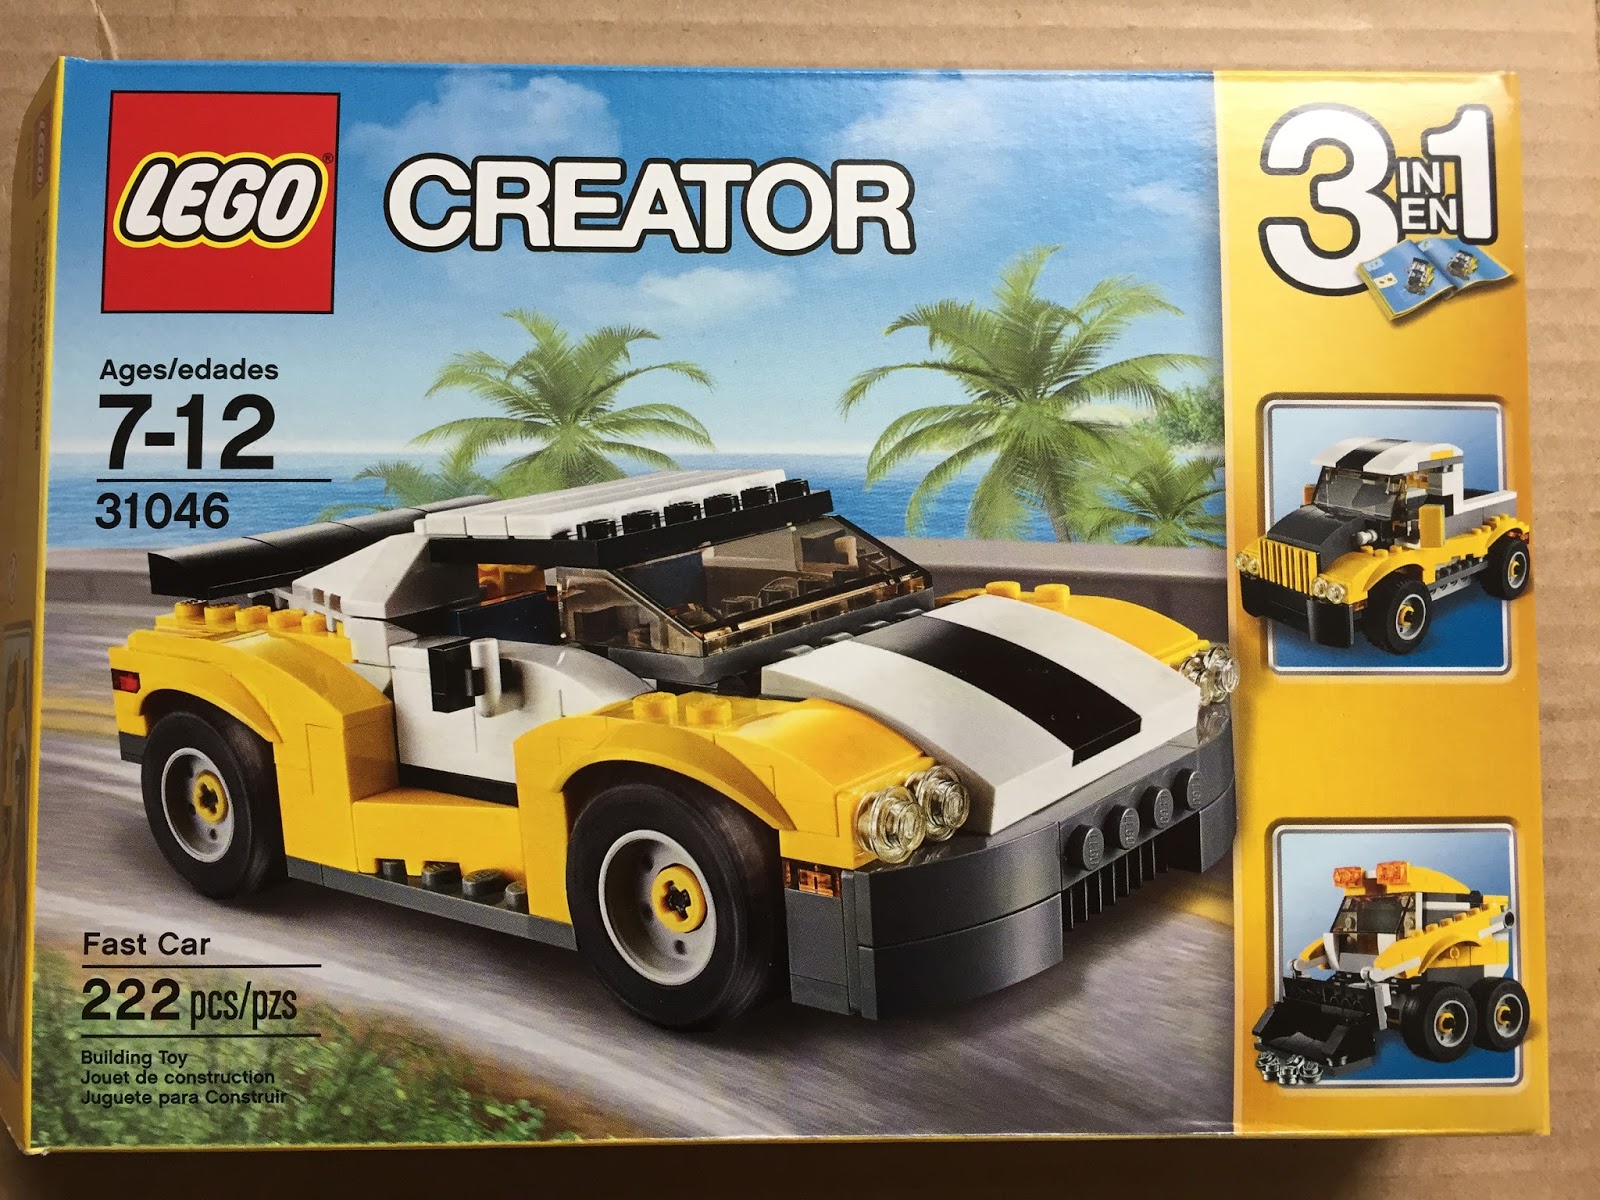 Lego Creator 3 in 1 Fast Car Review 31046